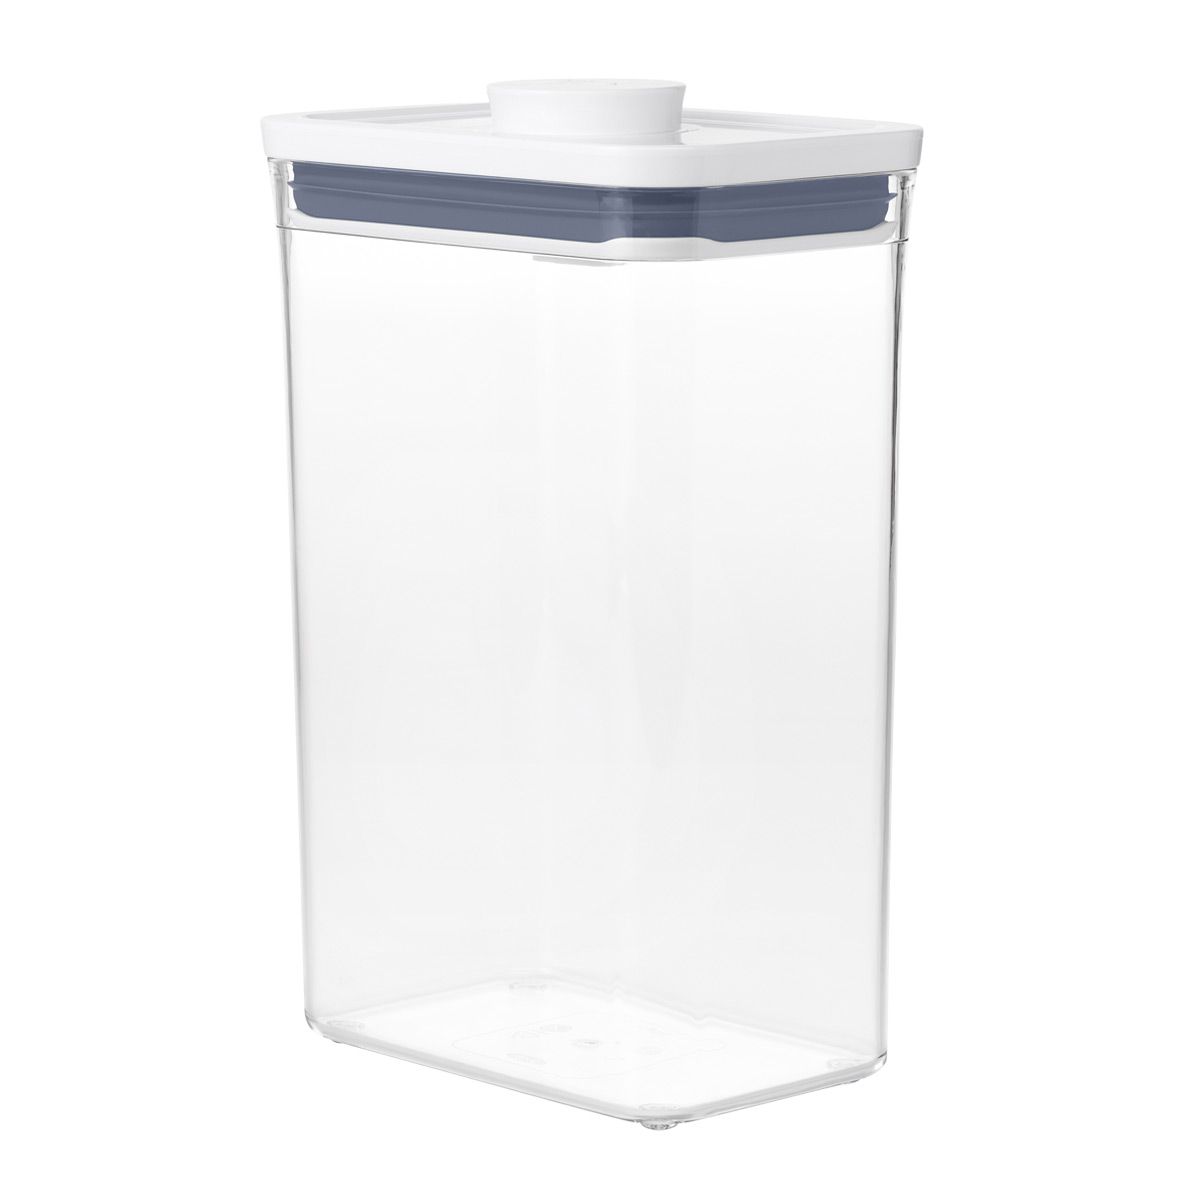 OXO 2.7 qt. Medium Rectangle POP ContainerSKU:100751354.416 Reviews | The Container Store